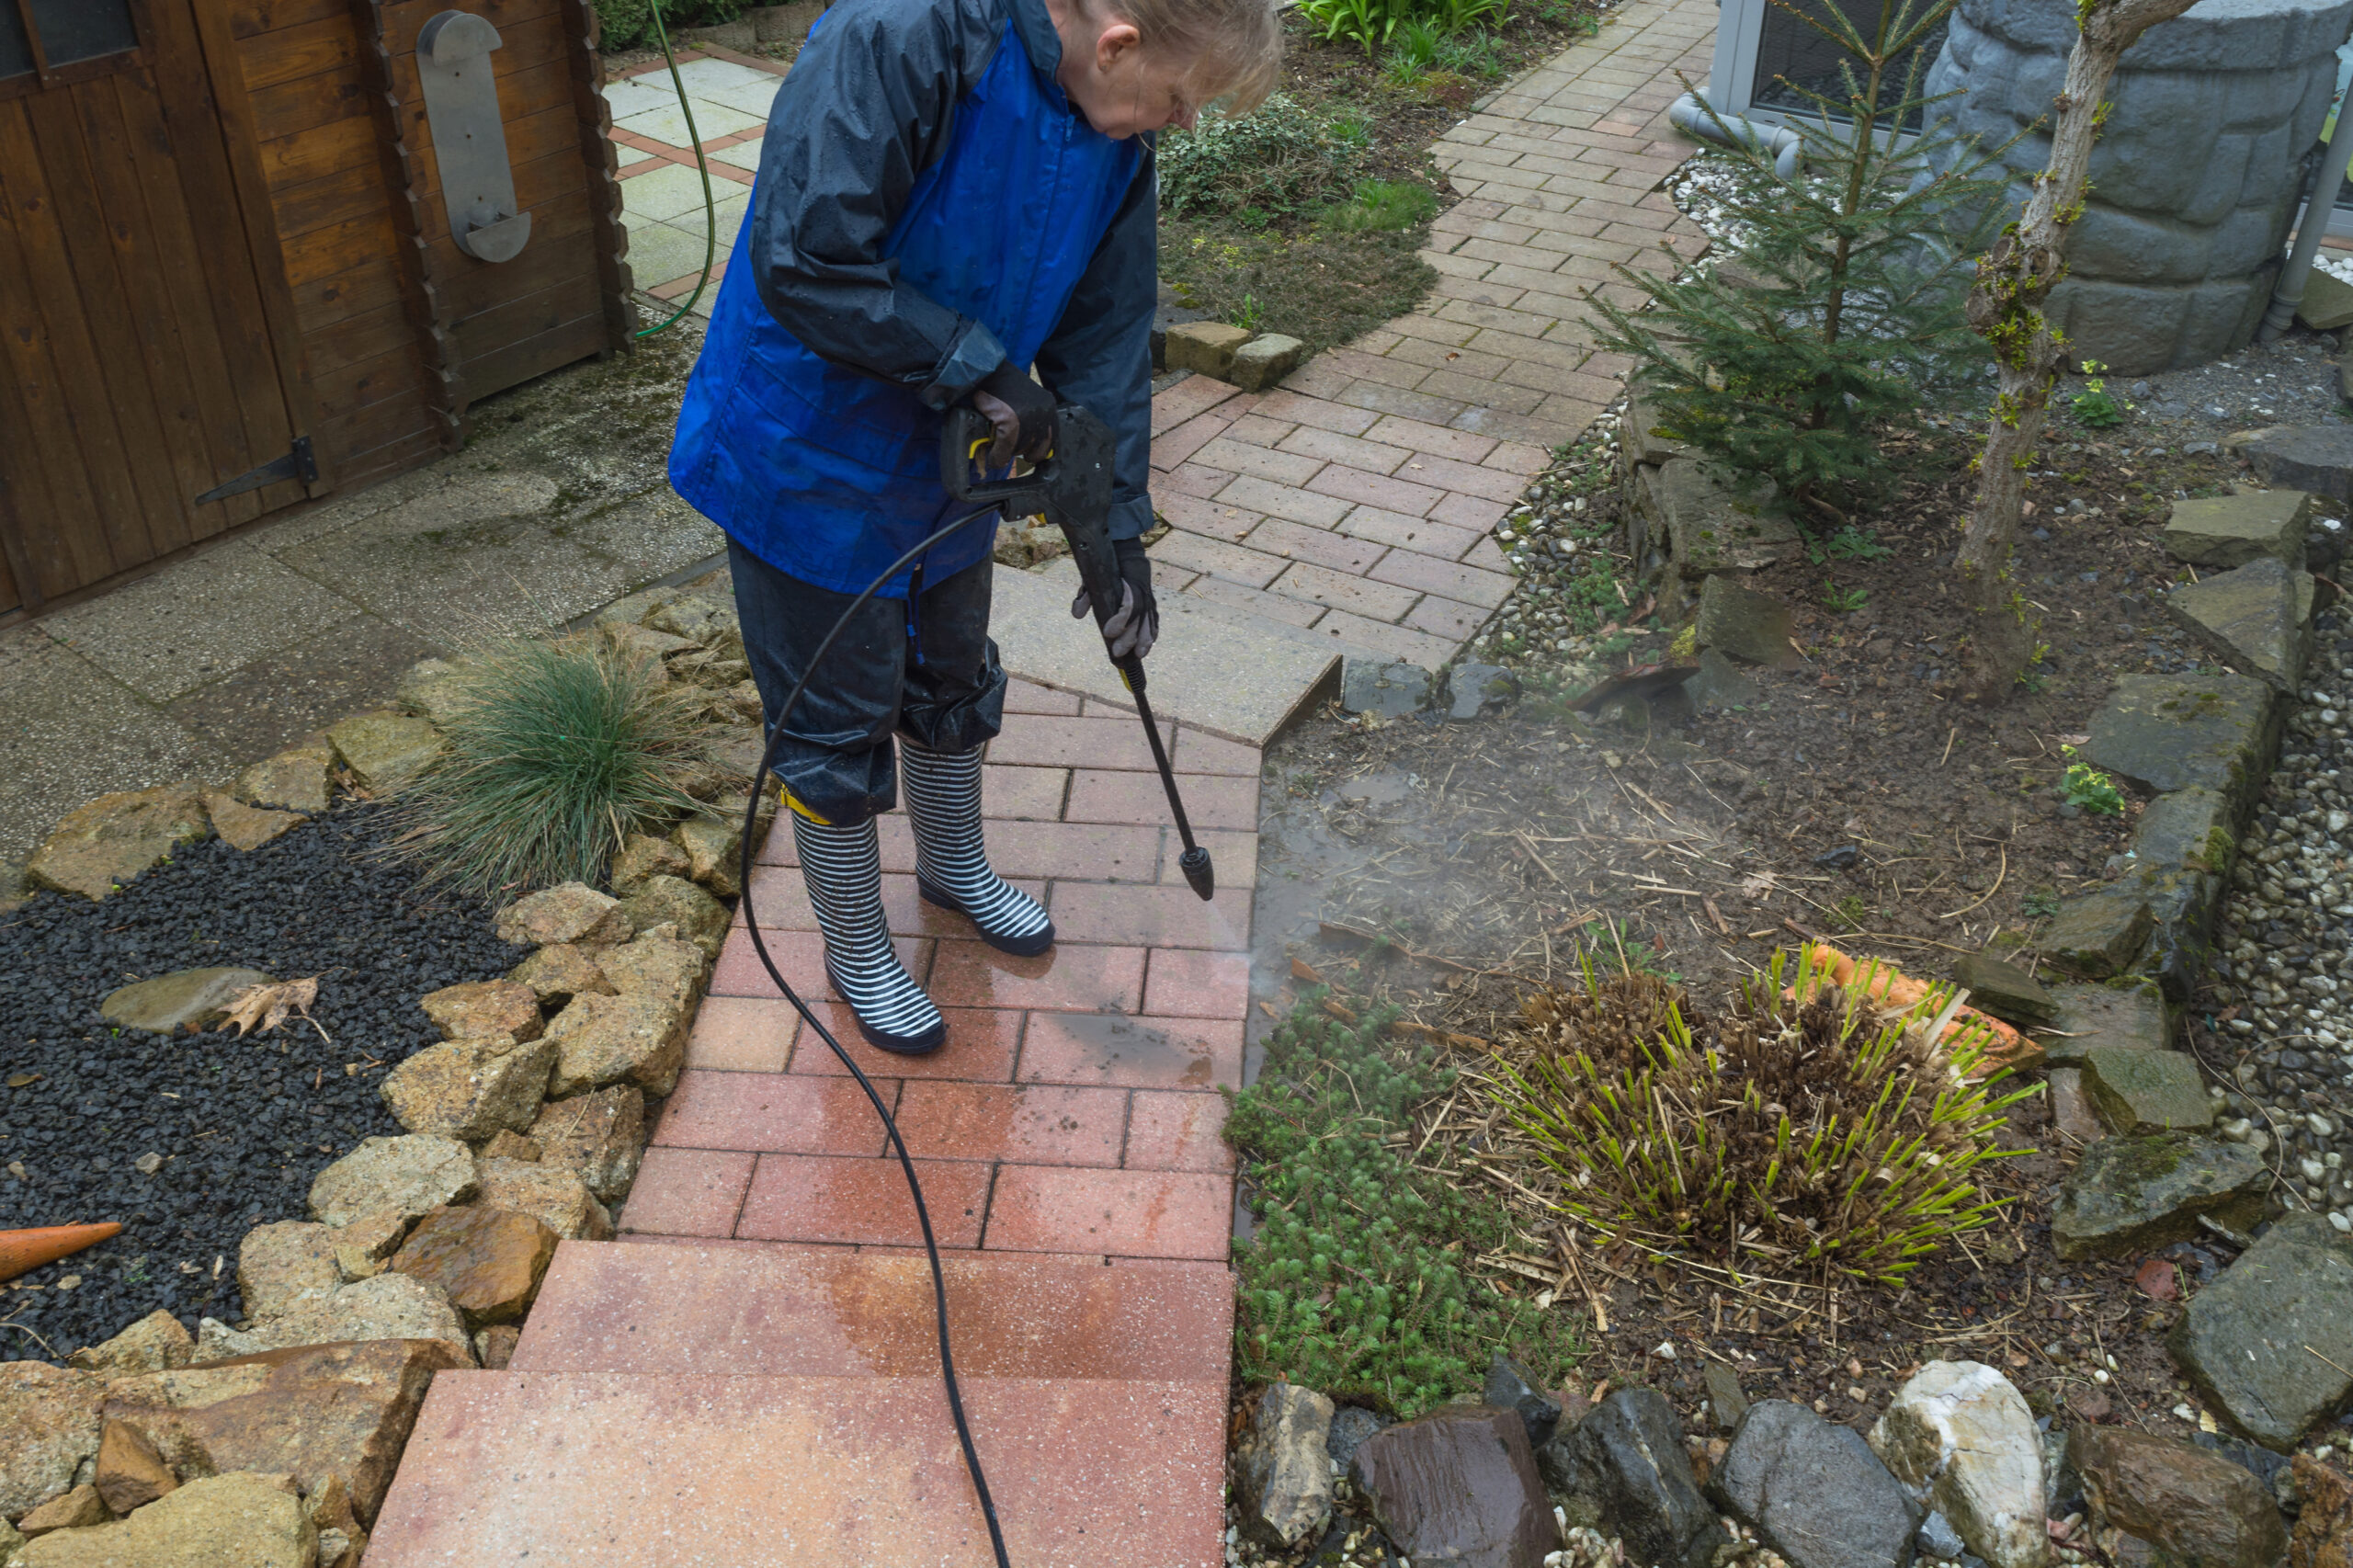 Using a pressure washer to clean a concrete patio